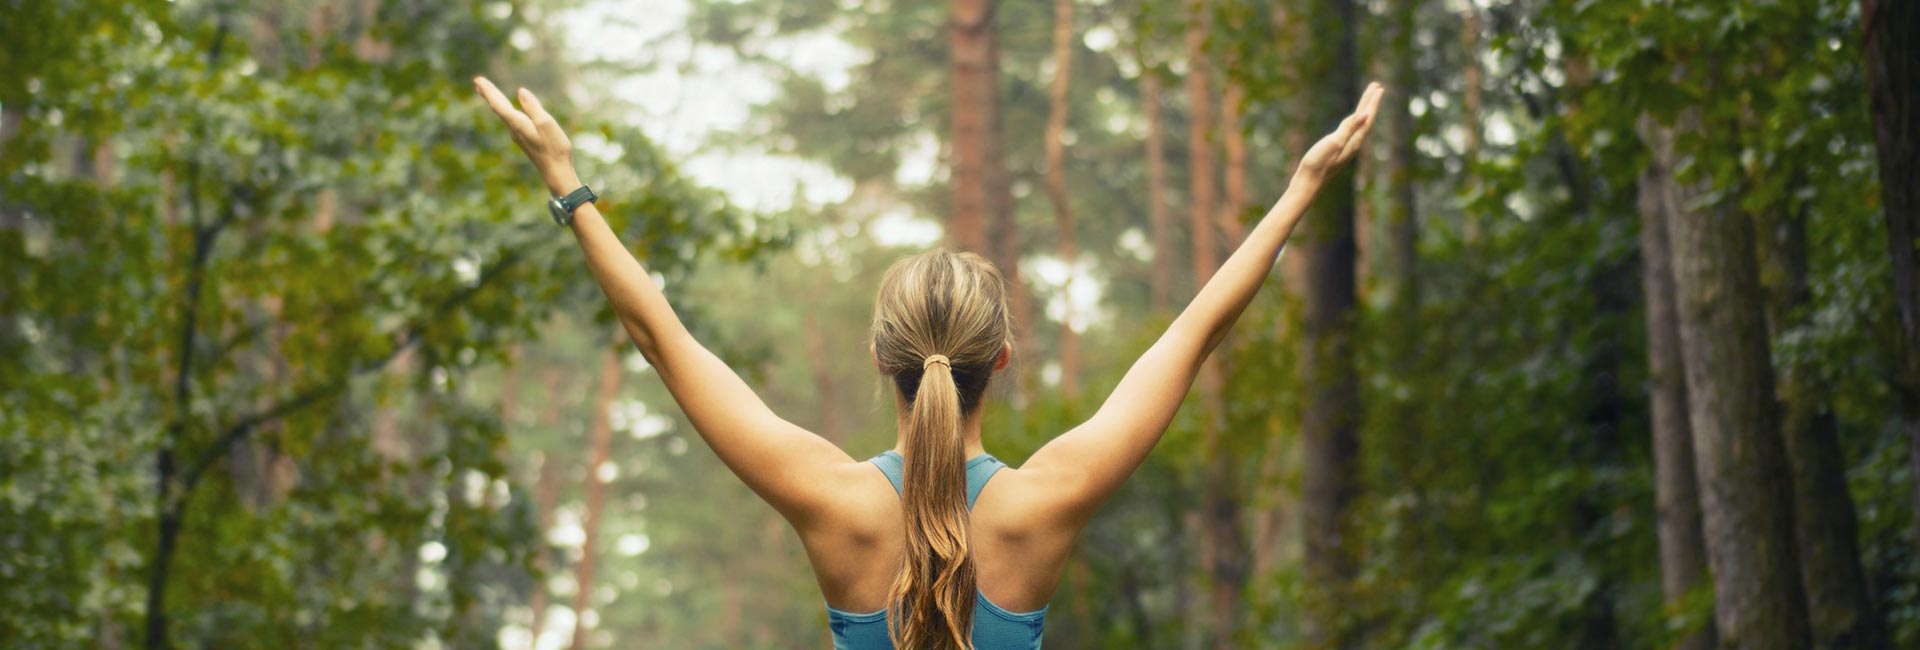 a woman holds her arms up in a wide "Y" outdoors - breathing